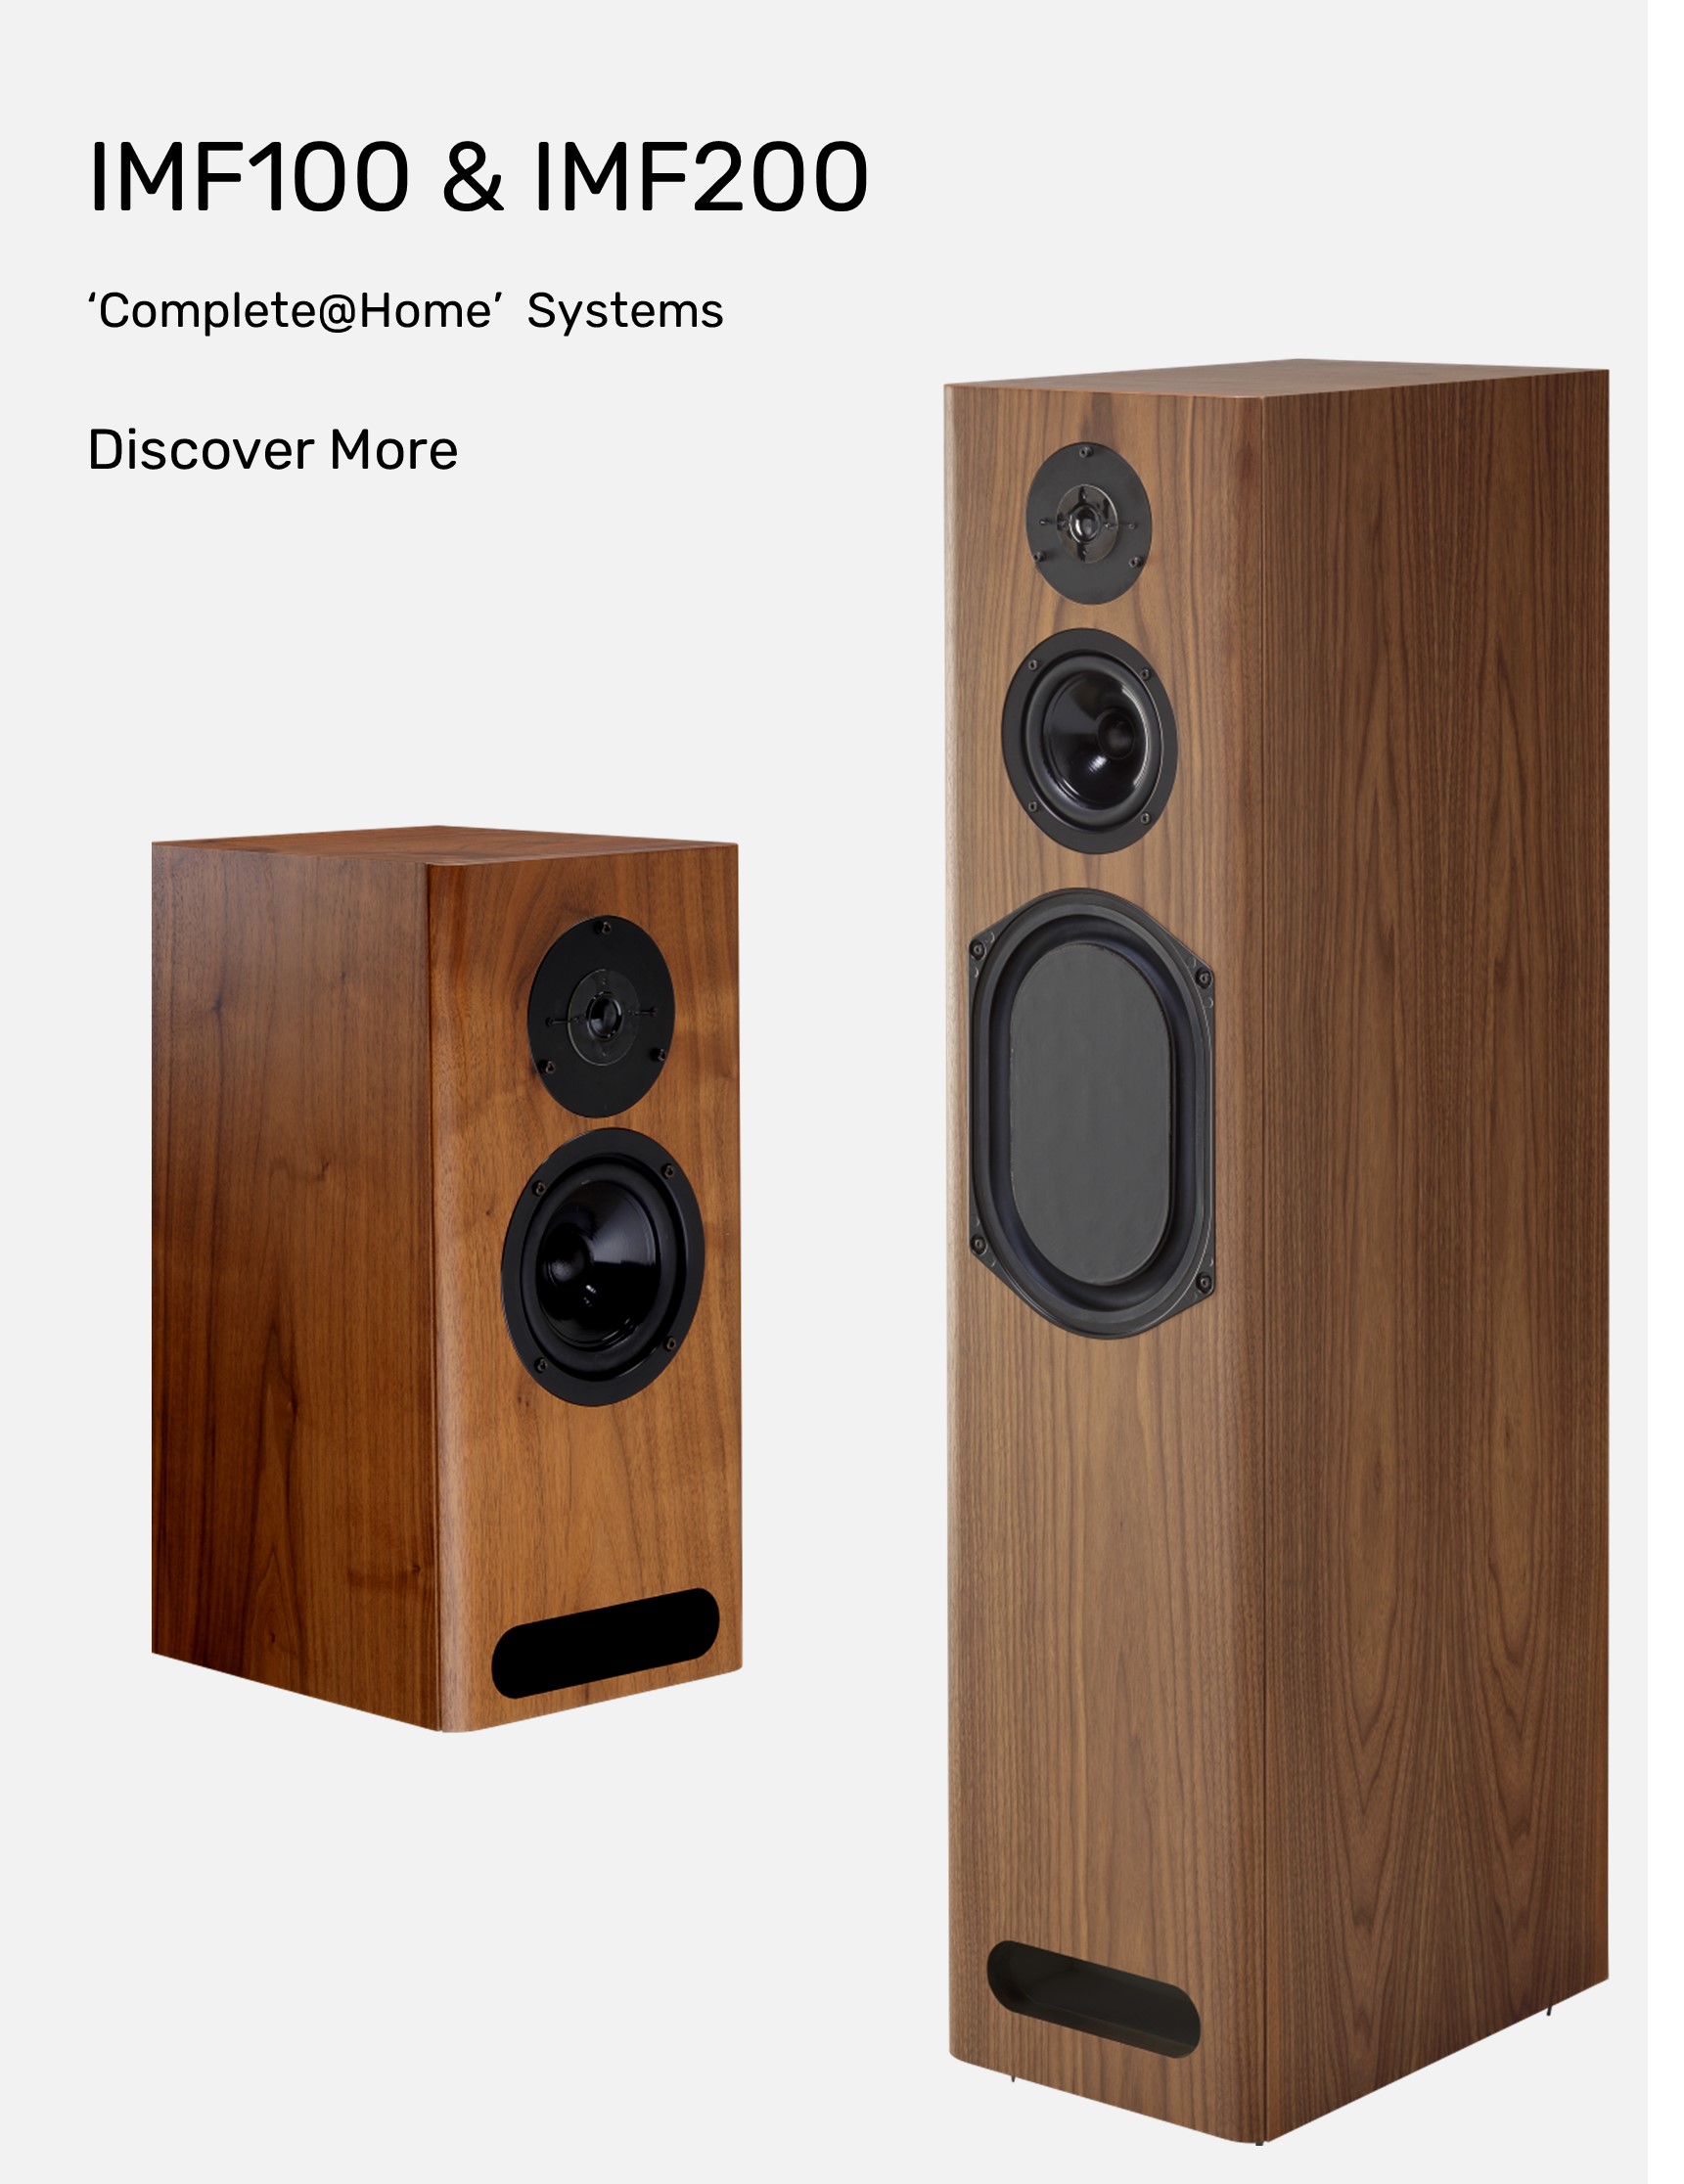 Falcon Acoustics | The Leading DIY Speaker Parts and Kit Supplier since 1972